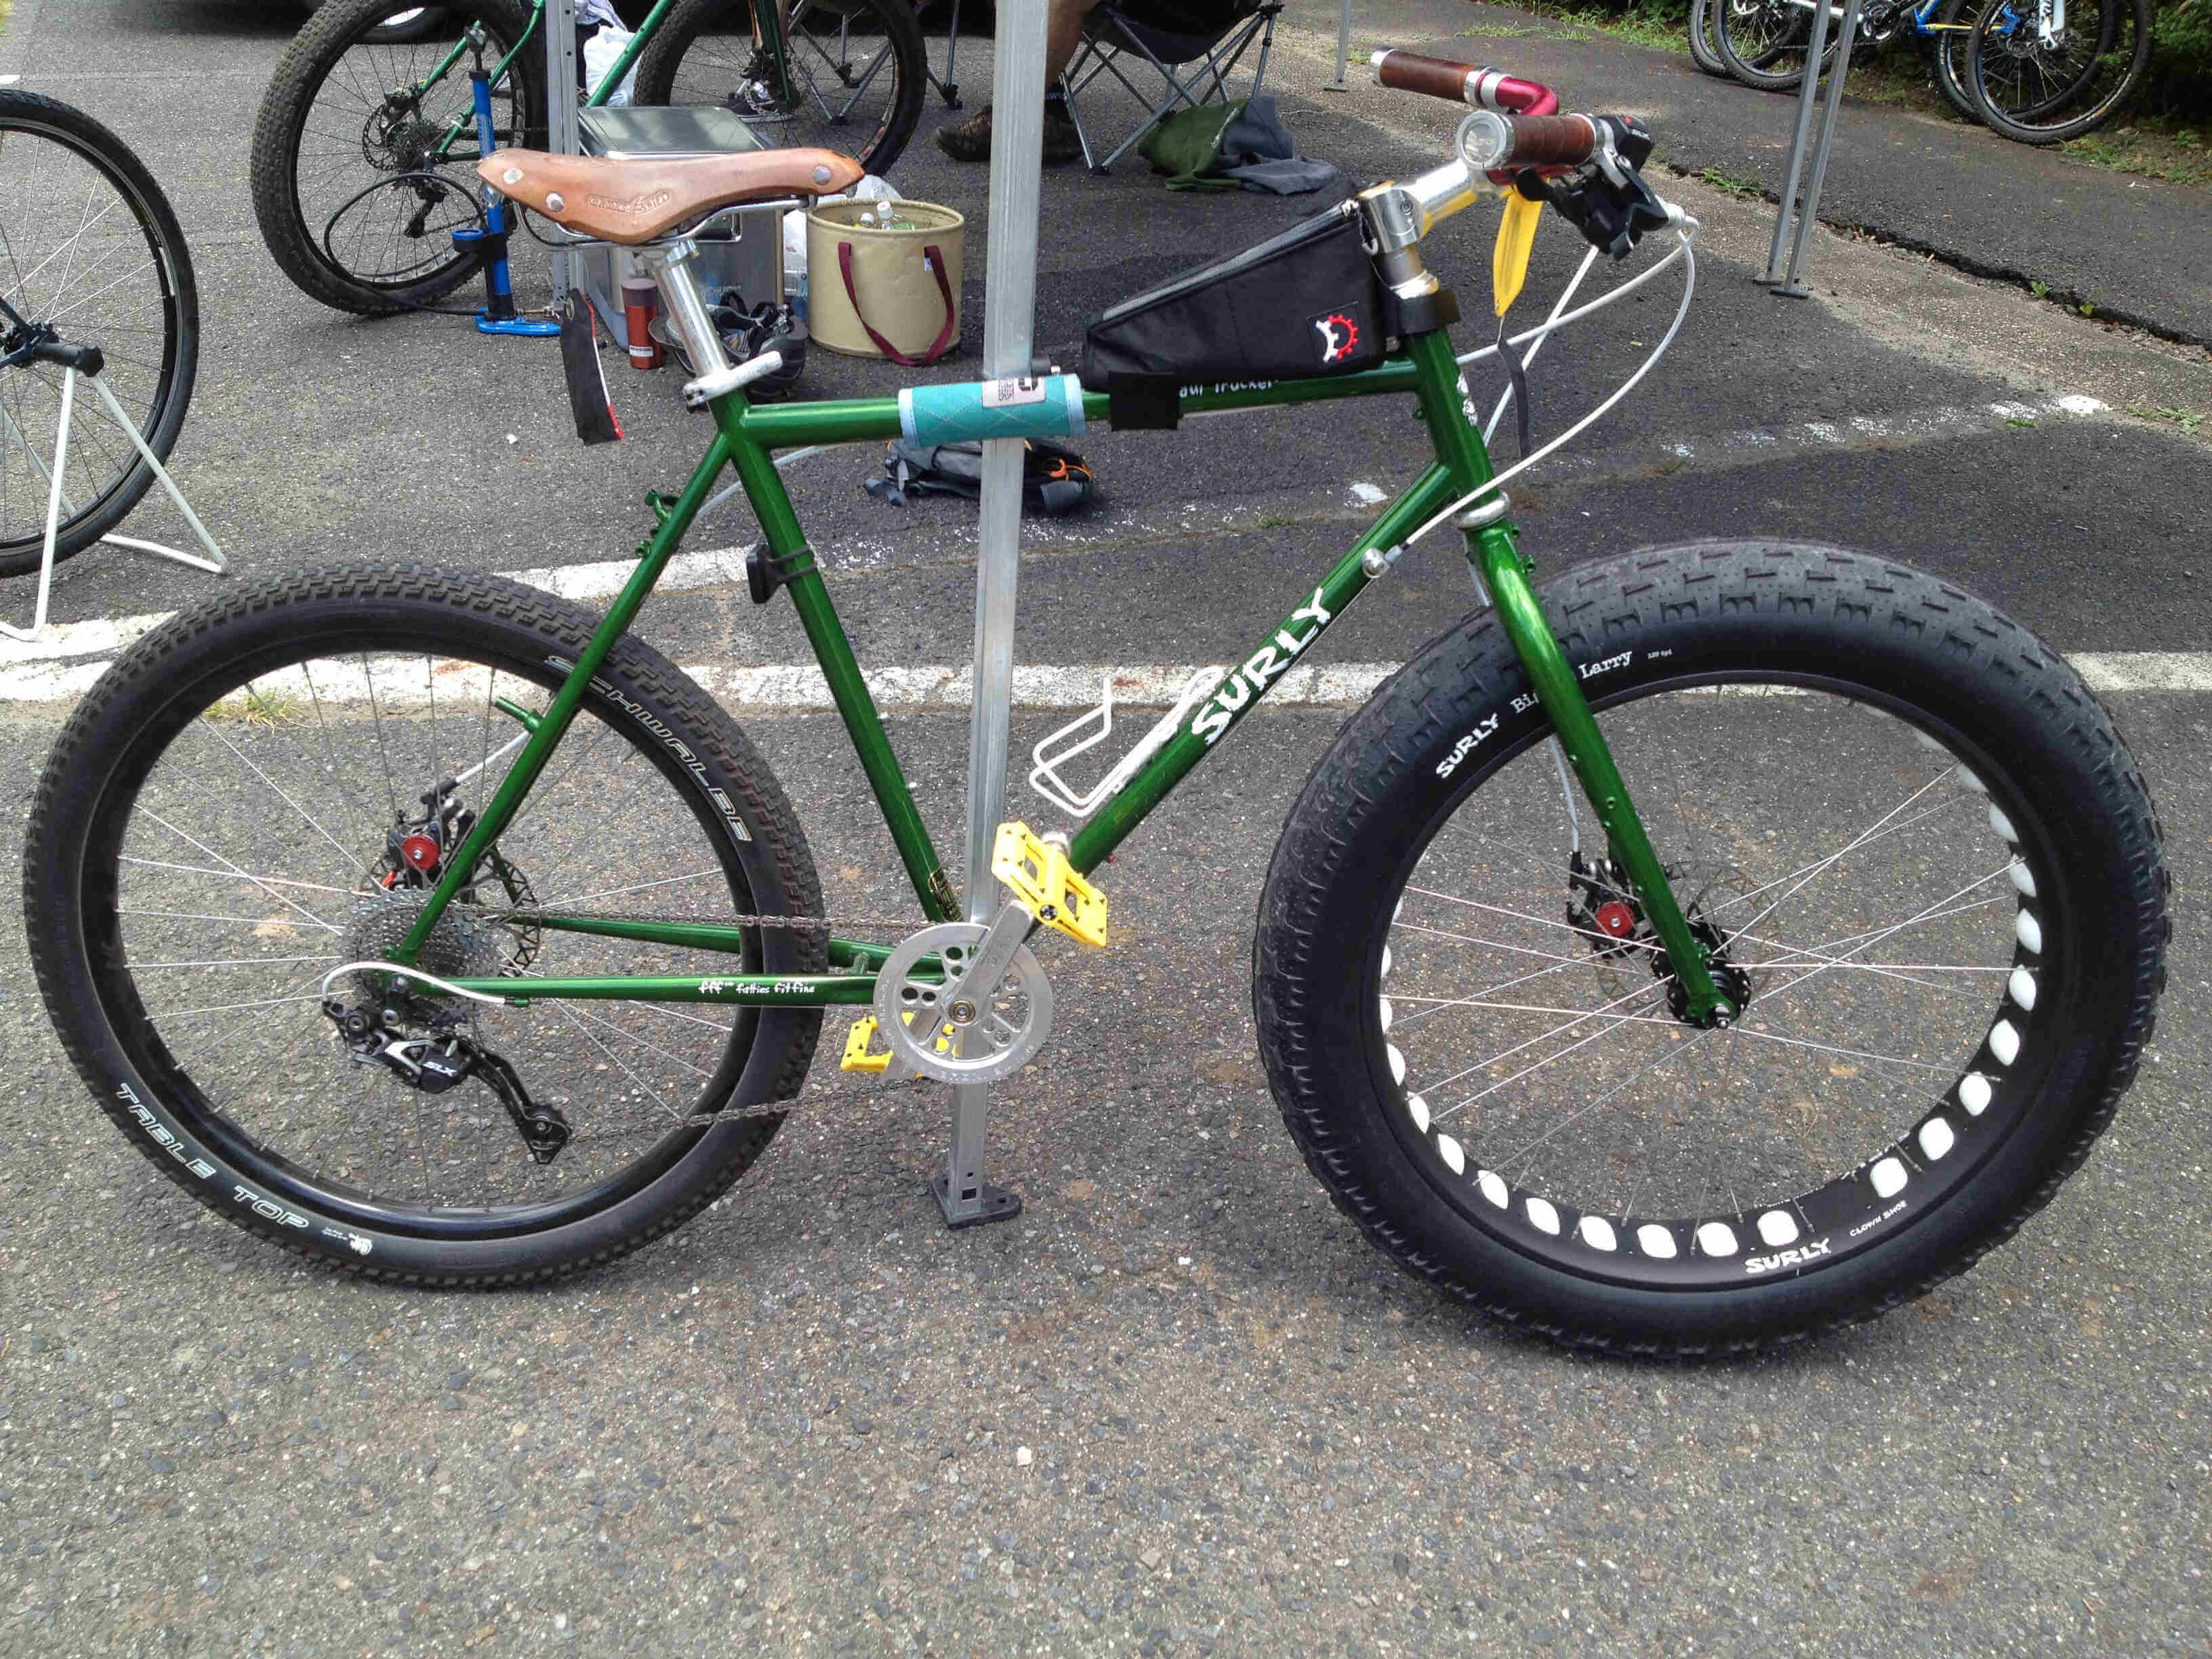 Right side view of a green Surly Long Haul Trucker bike, with a fat wheel on the front, leaning on a canopy pole